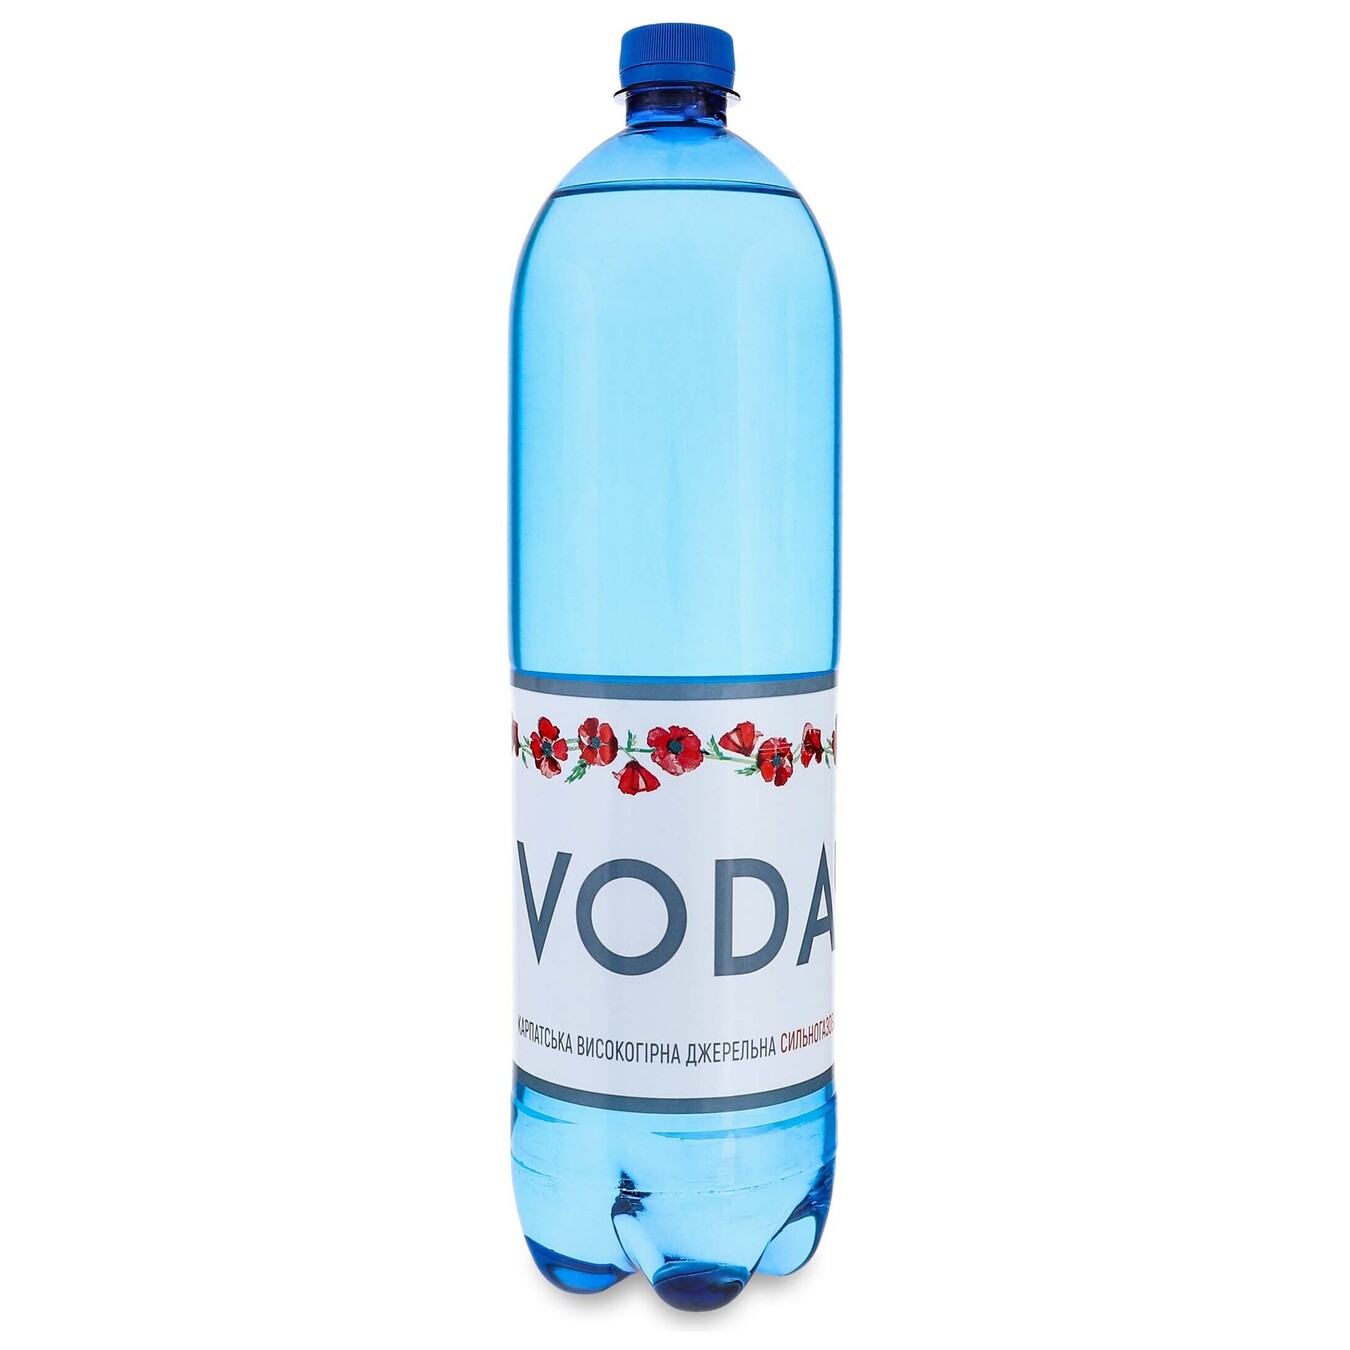 VodaUA strongly carbonated mineral water 1.5 l